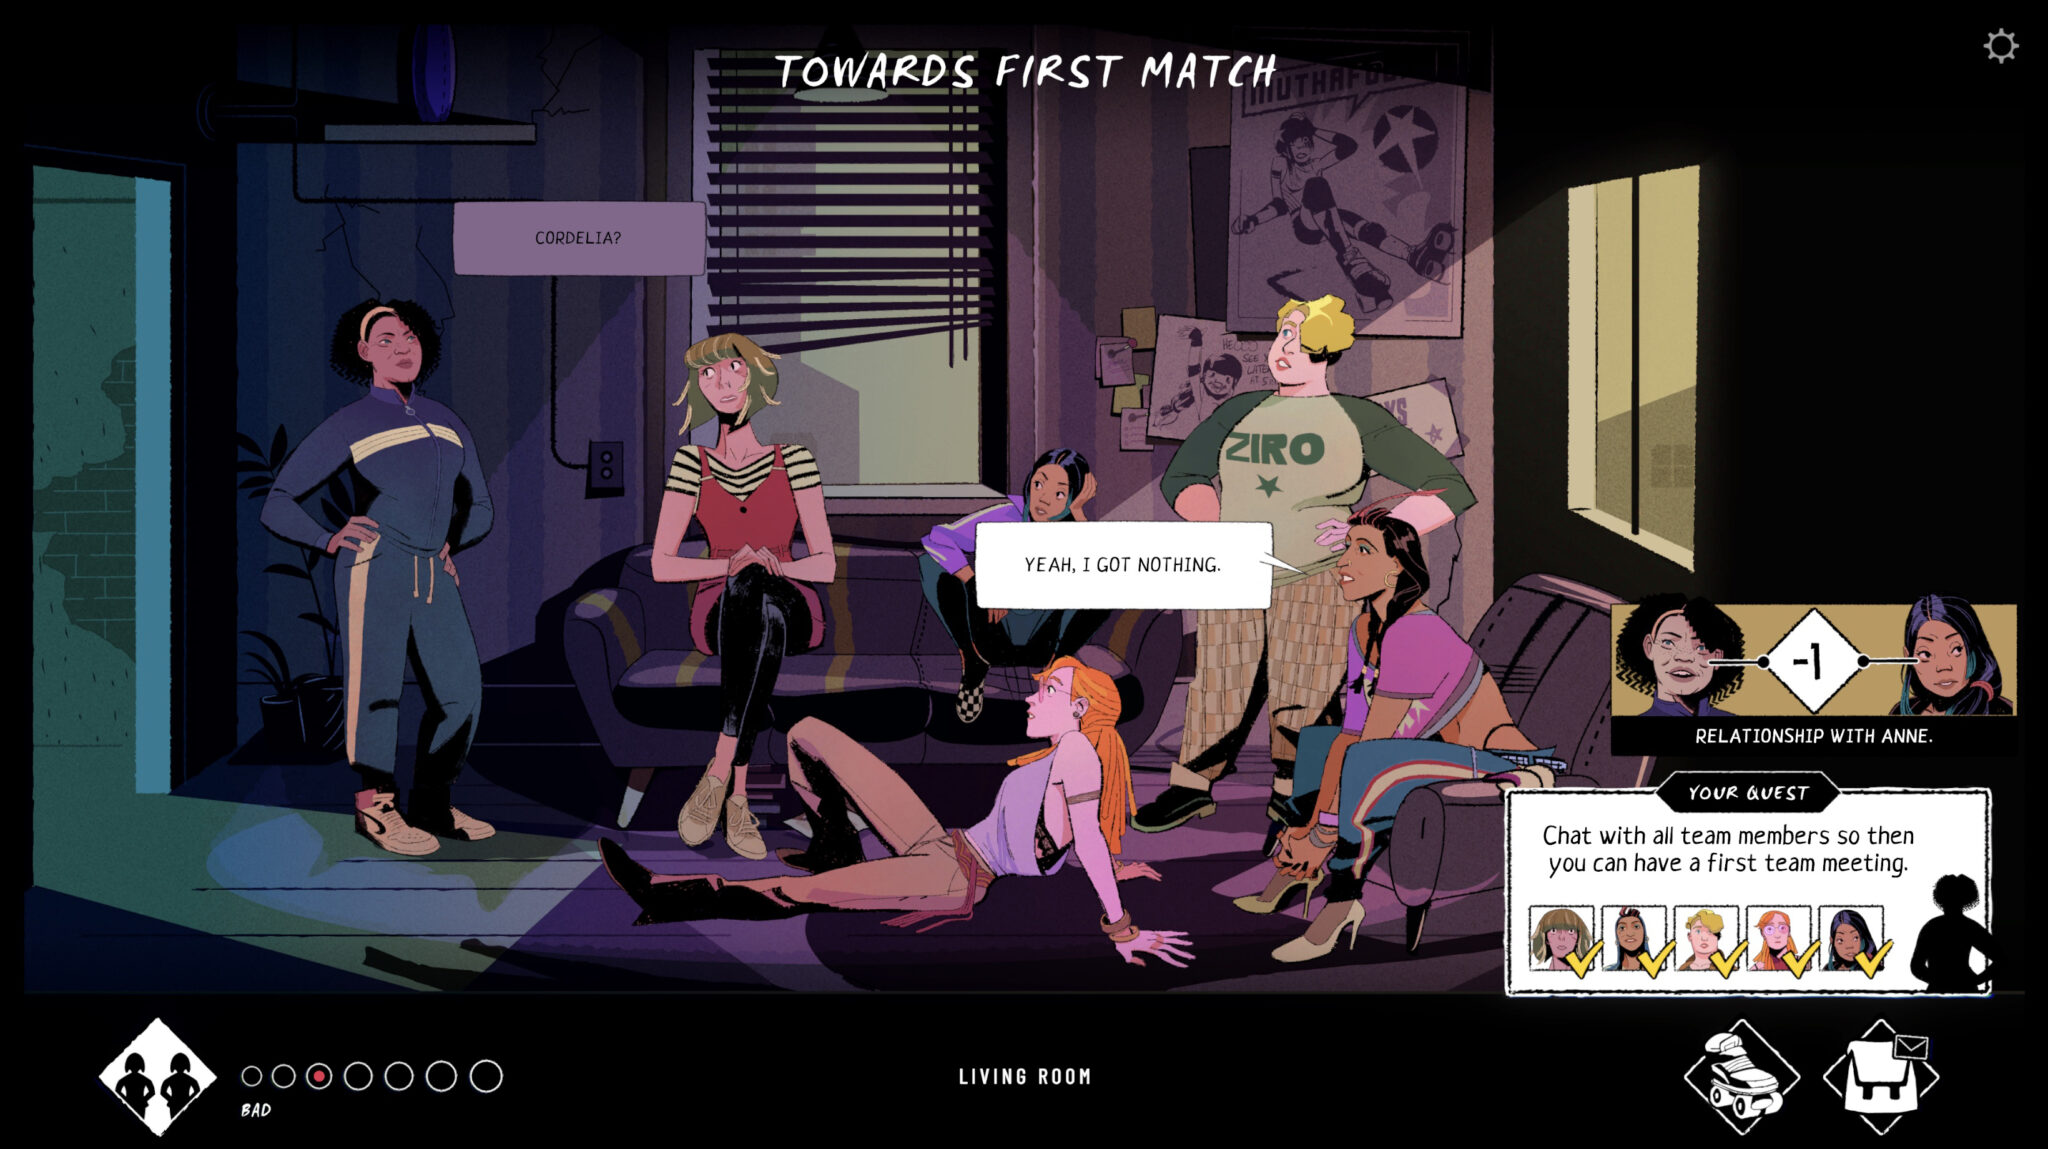 Screenshot of the team in ROLLER DRAMA sitting in their living room. From left to right: Joann, Portia, Lily, Anne, Juliet, Cordelia